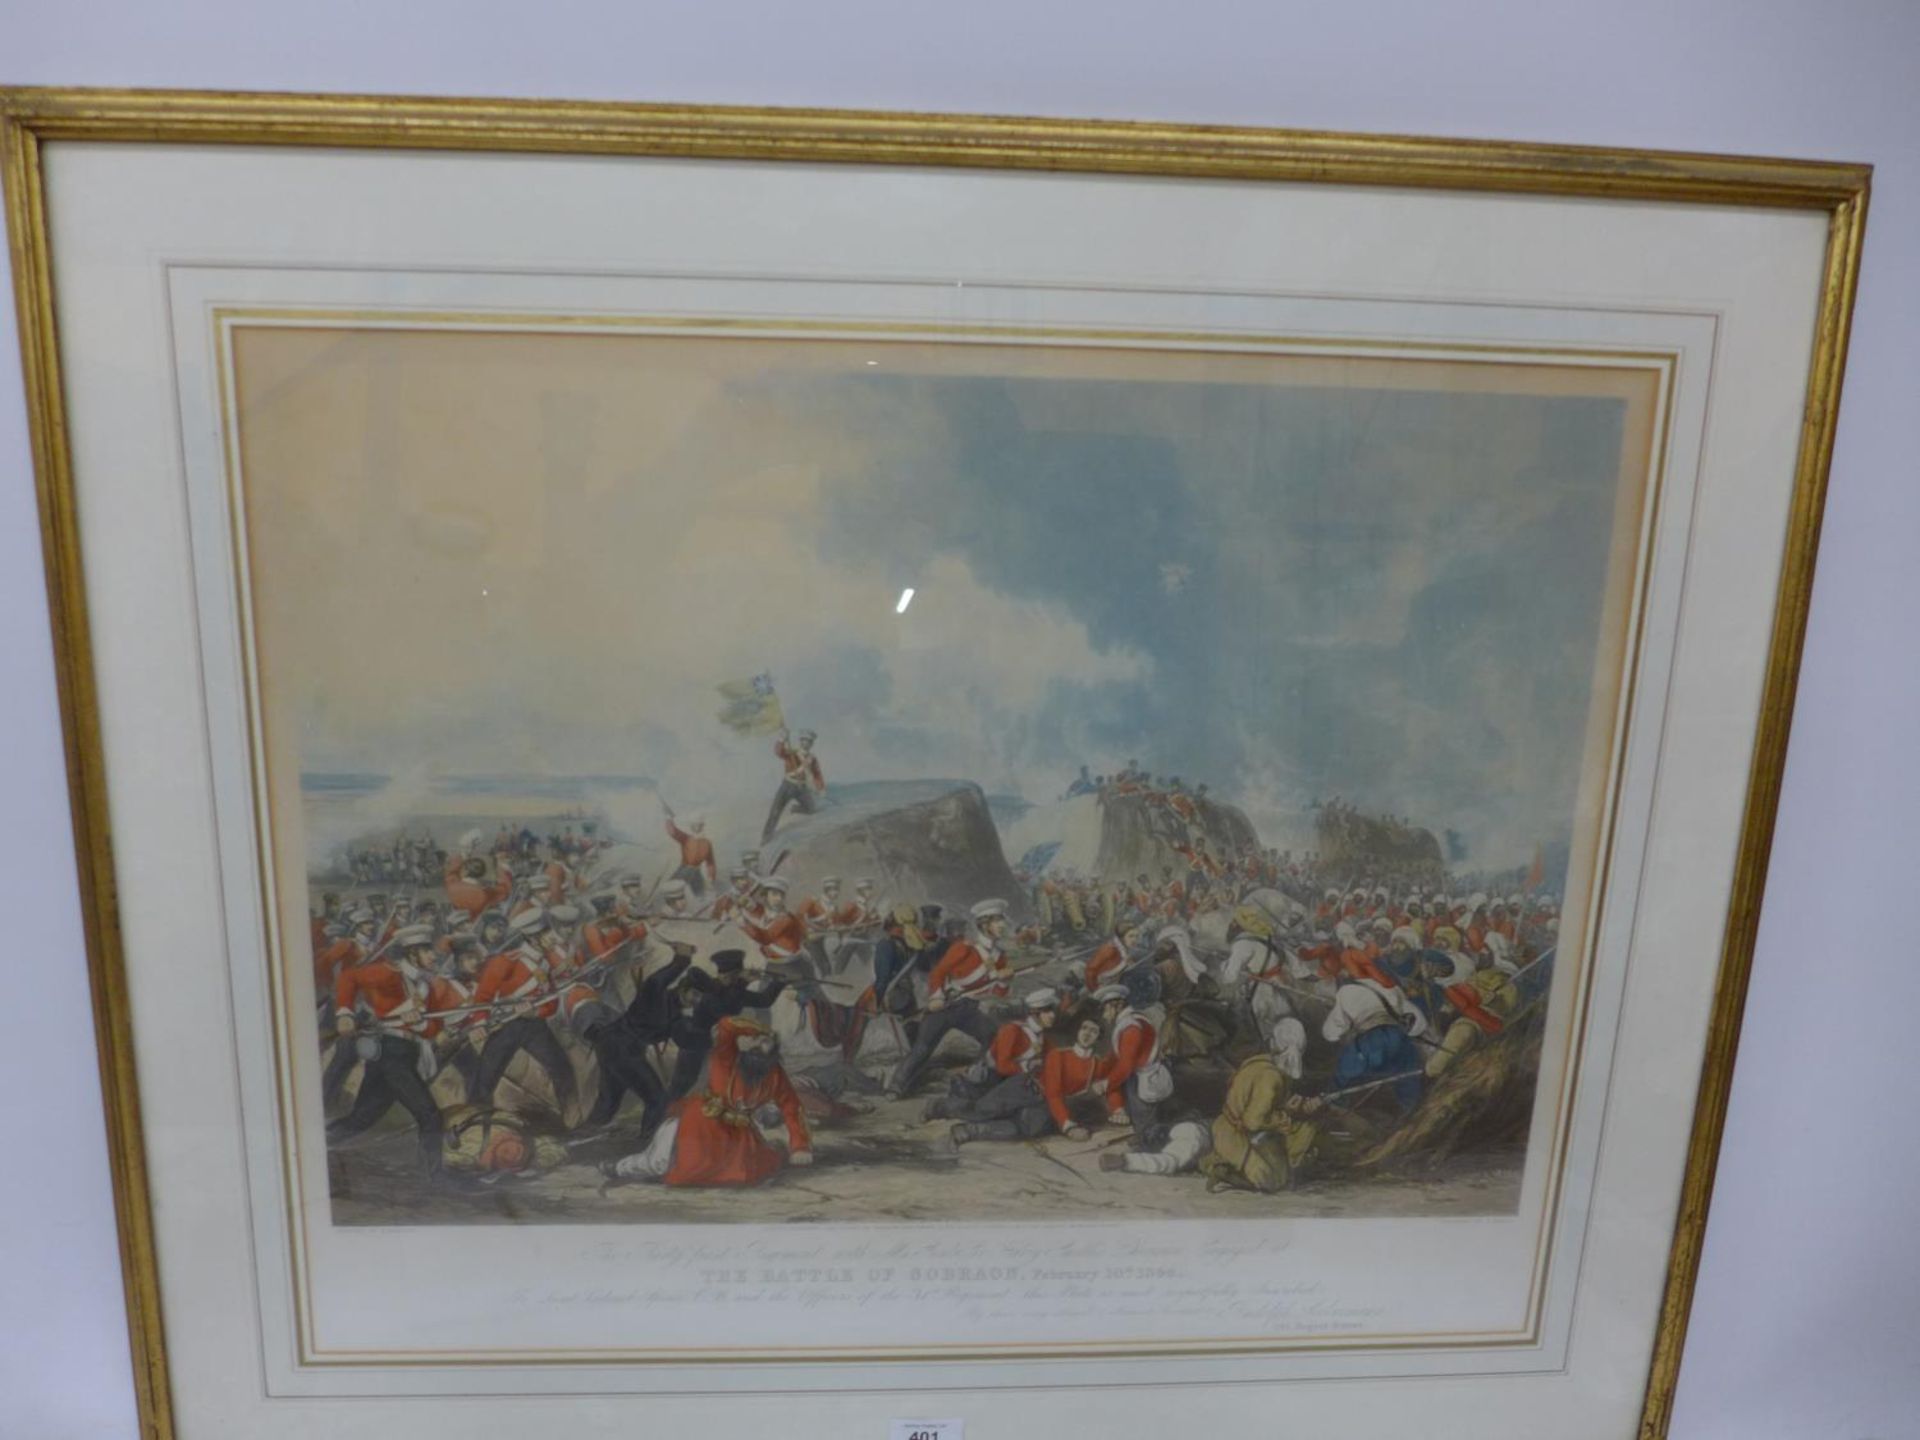 A MID 19TH CENTURY COLOURED ENGRAVING OF THE BATTLE OF SOBRAON 1846, PUBLISHED BY RUDOLPH